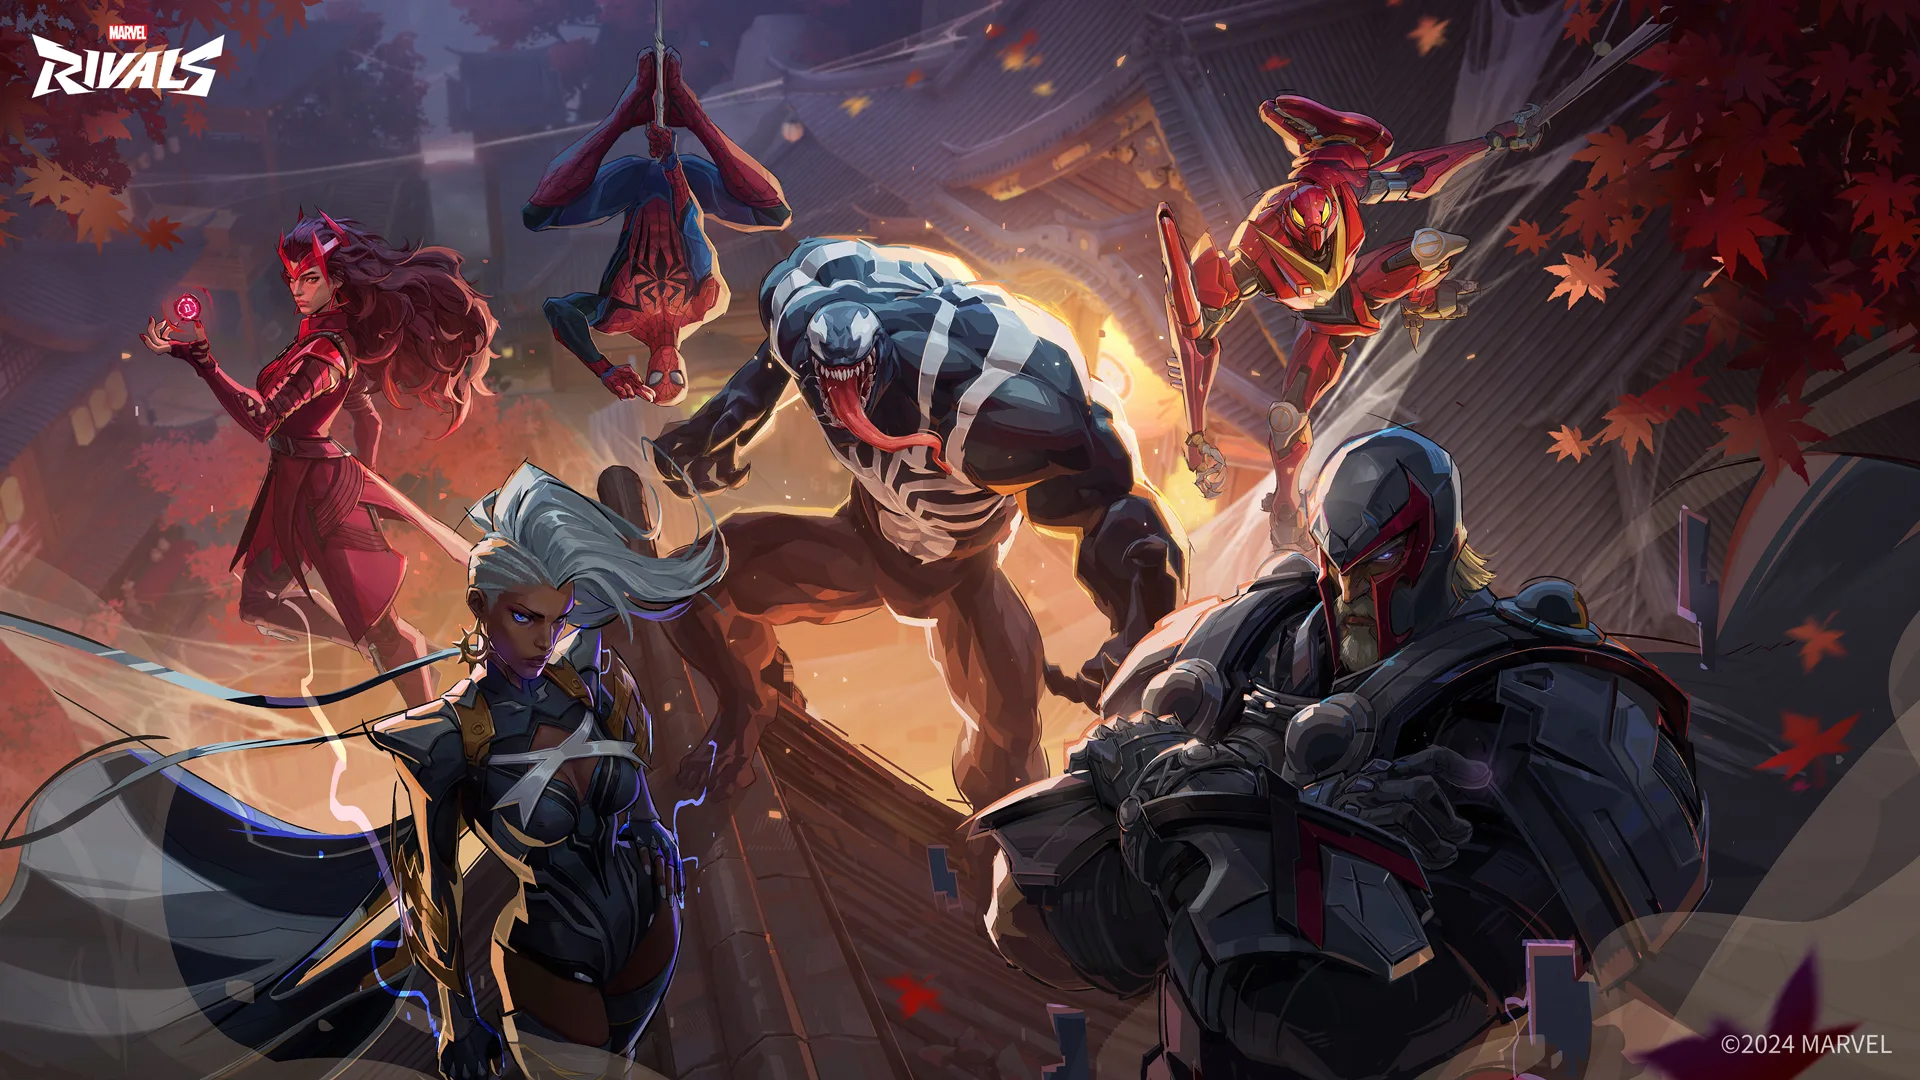 Marvel Rivals is also heading to console